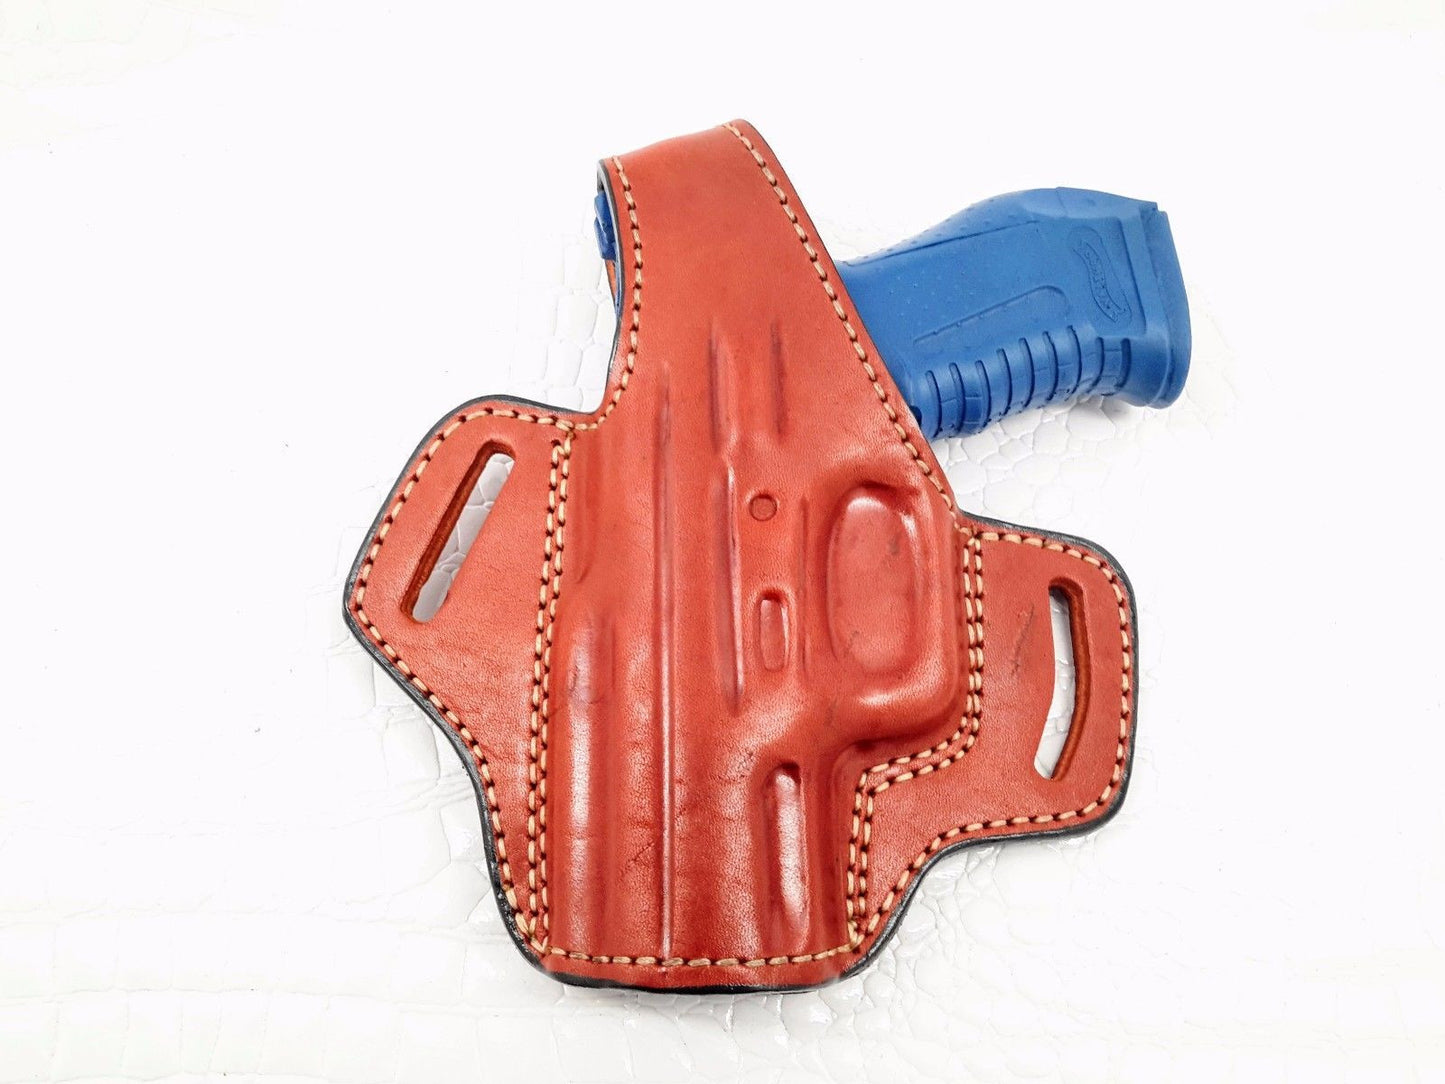 HK45 COMPACT OWB Thumb Break Leather Belt Holster - Choose your Color & Hand